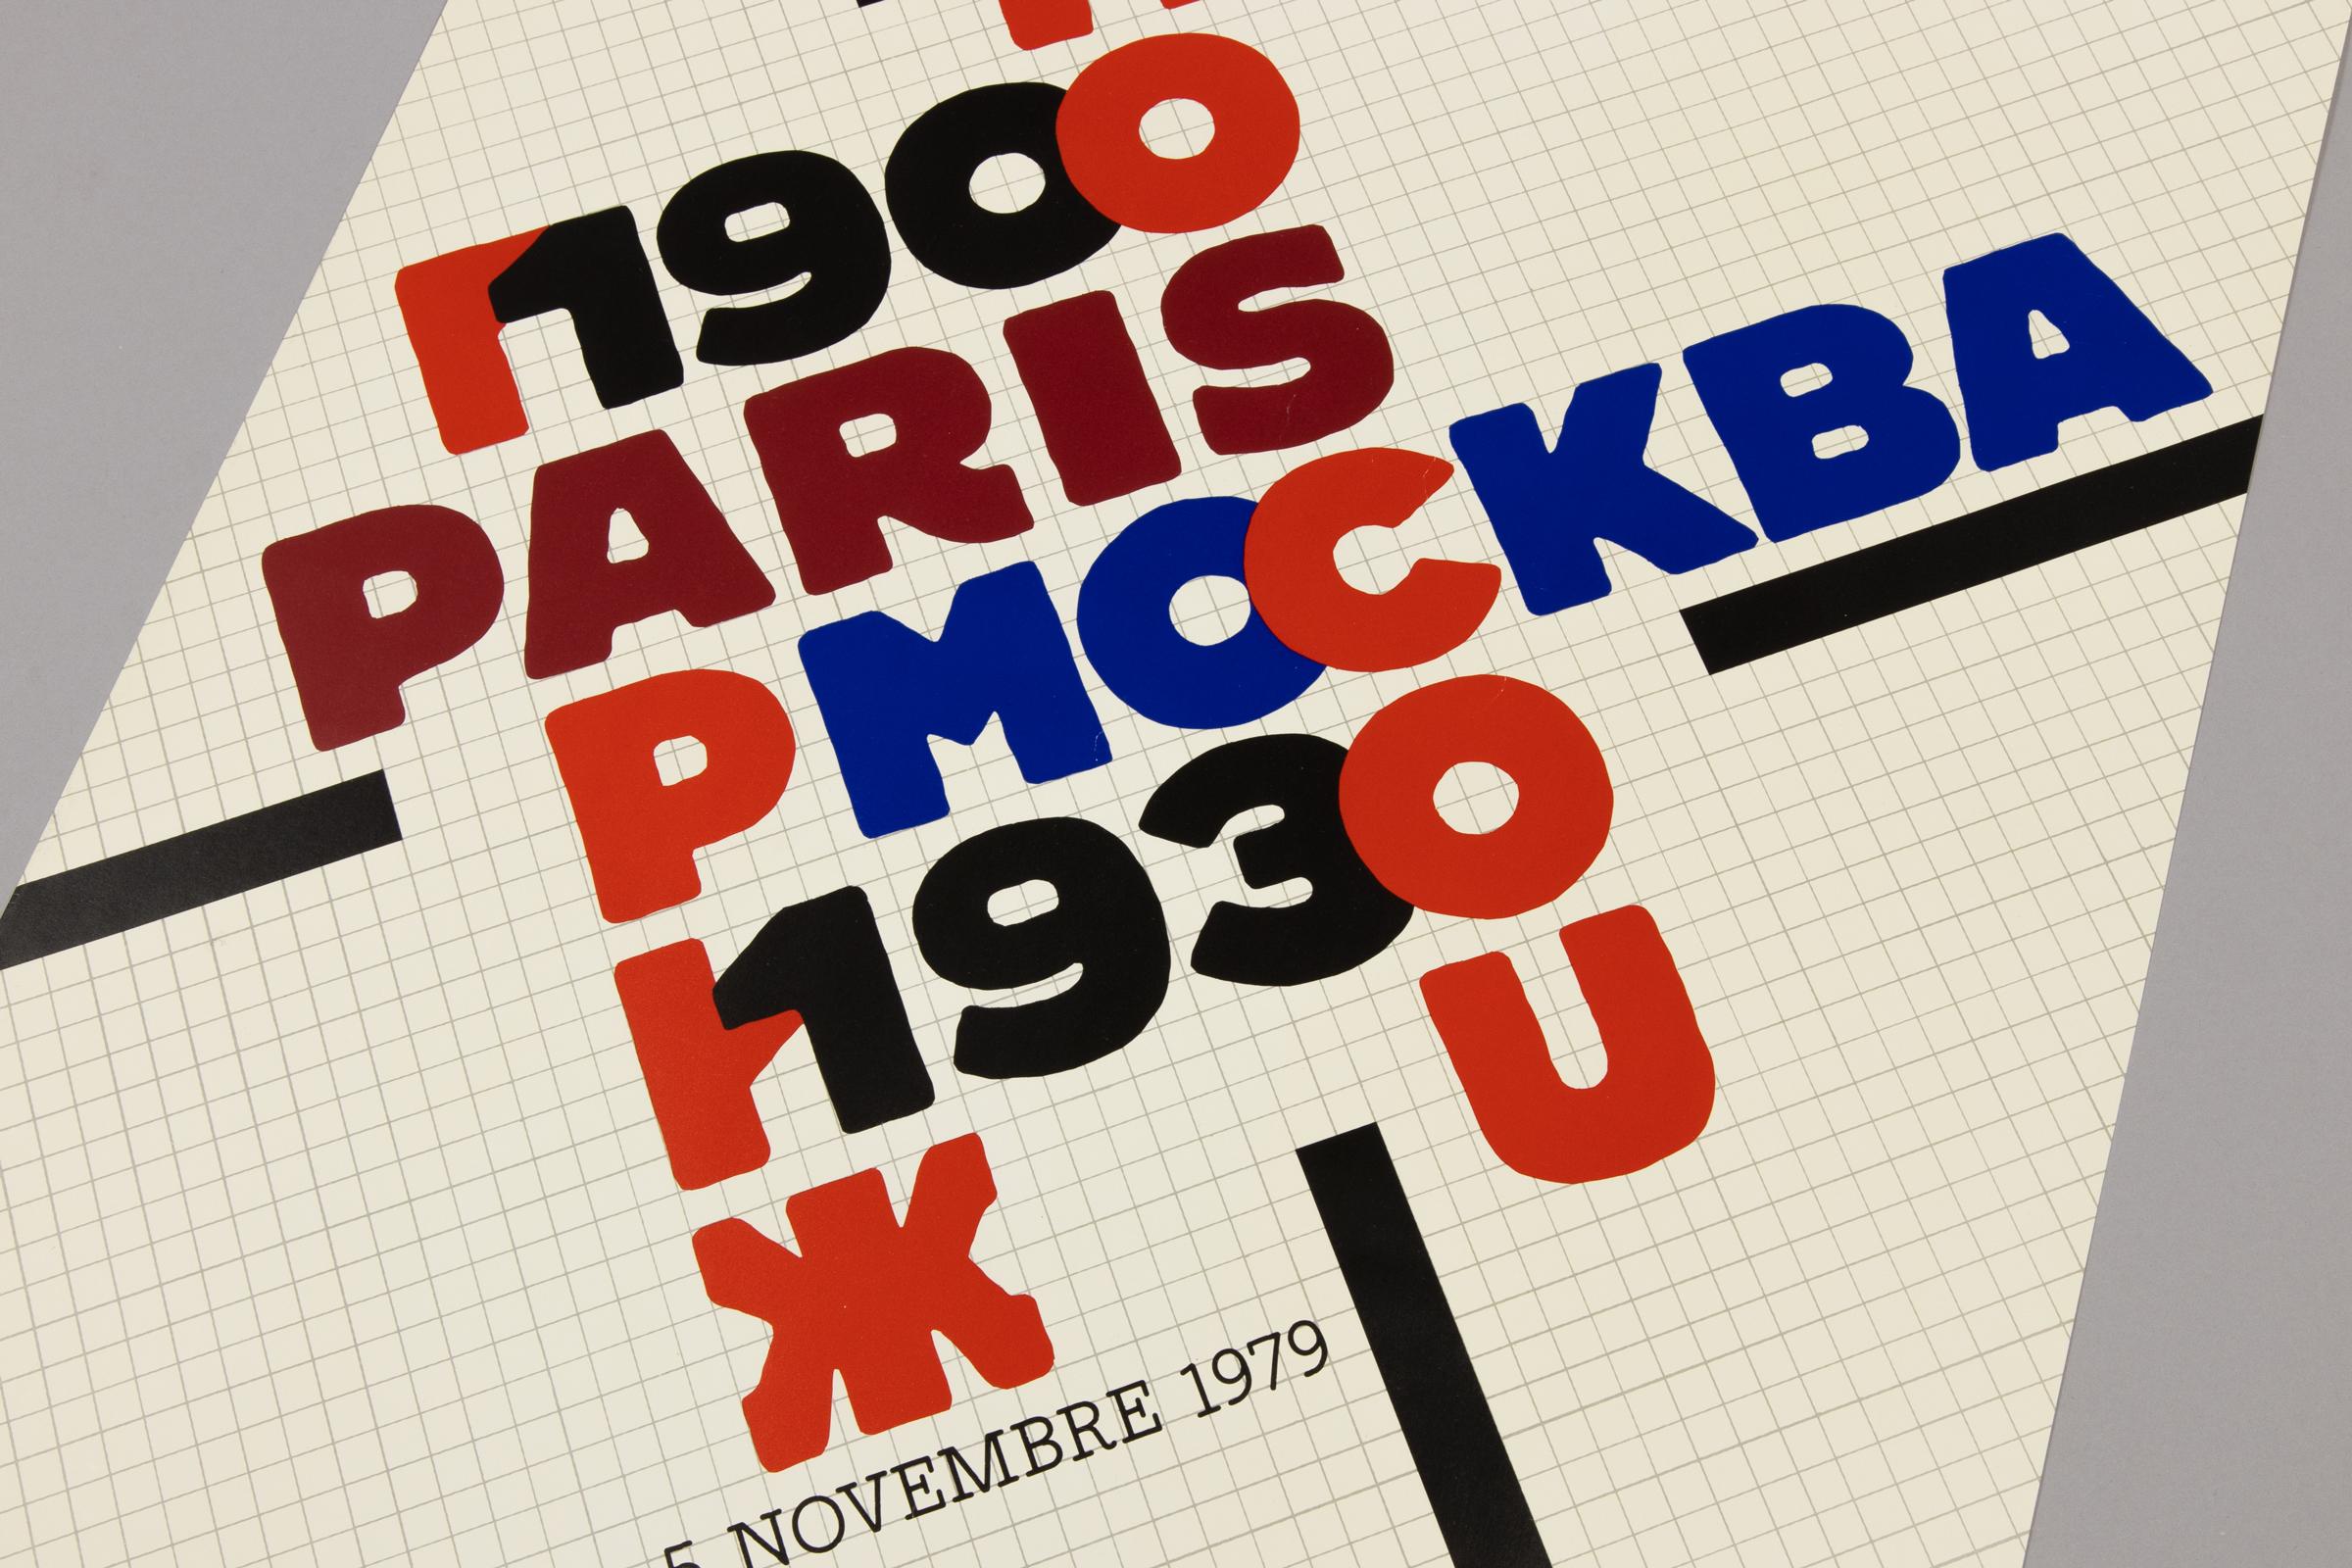 Paris-Moscou 1900-1930, Centre Pompidou: Original Exhibition Poster from 1979 - Abstract Print by Roman Cieslewicz